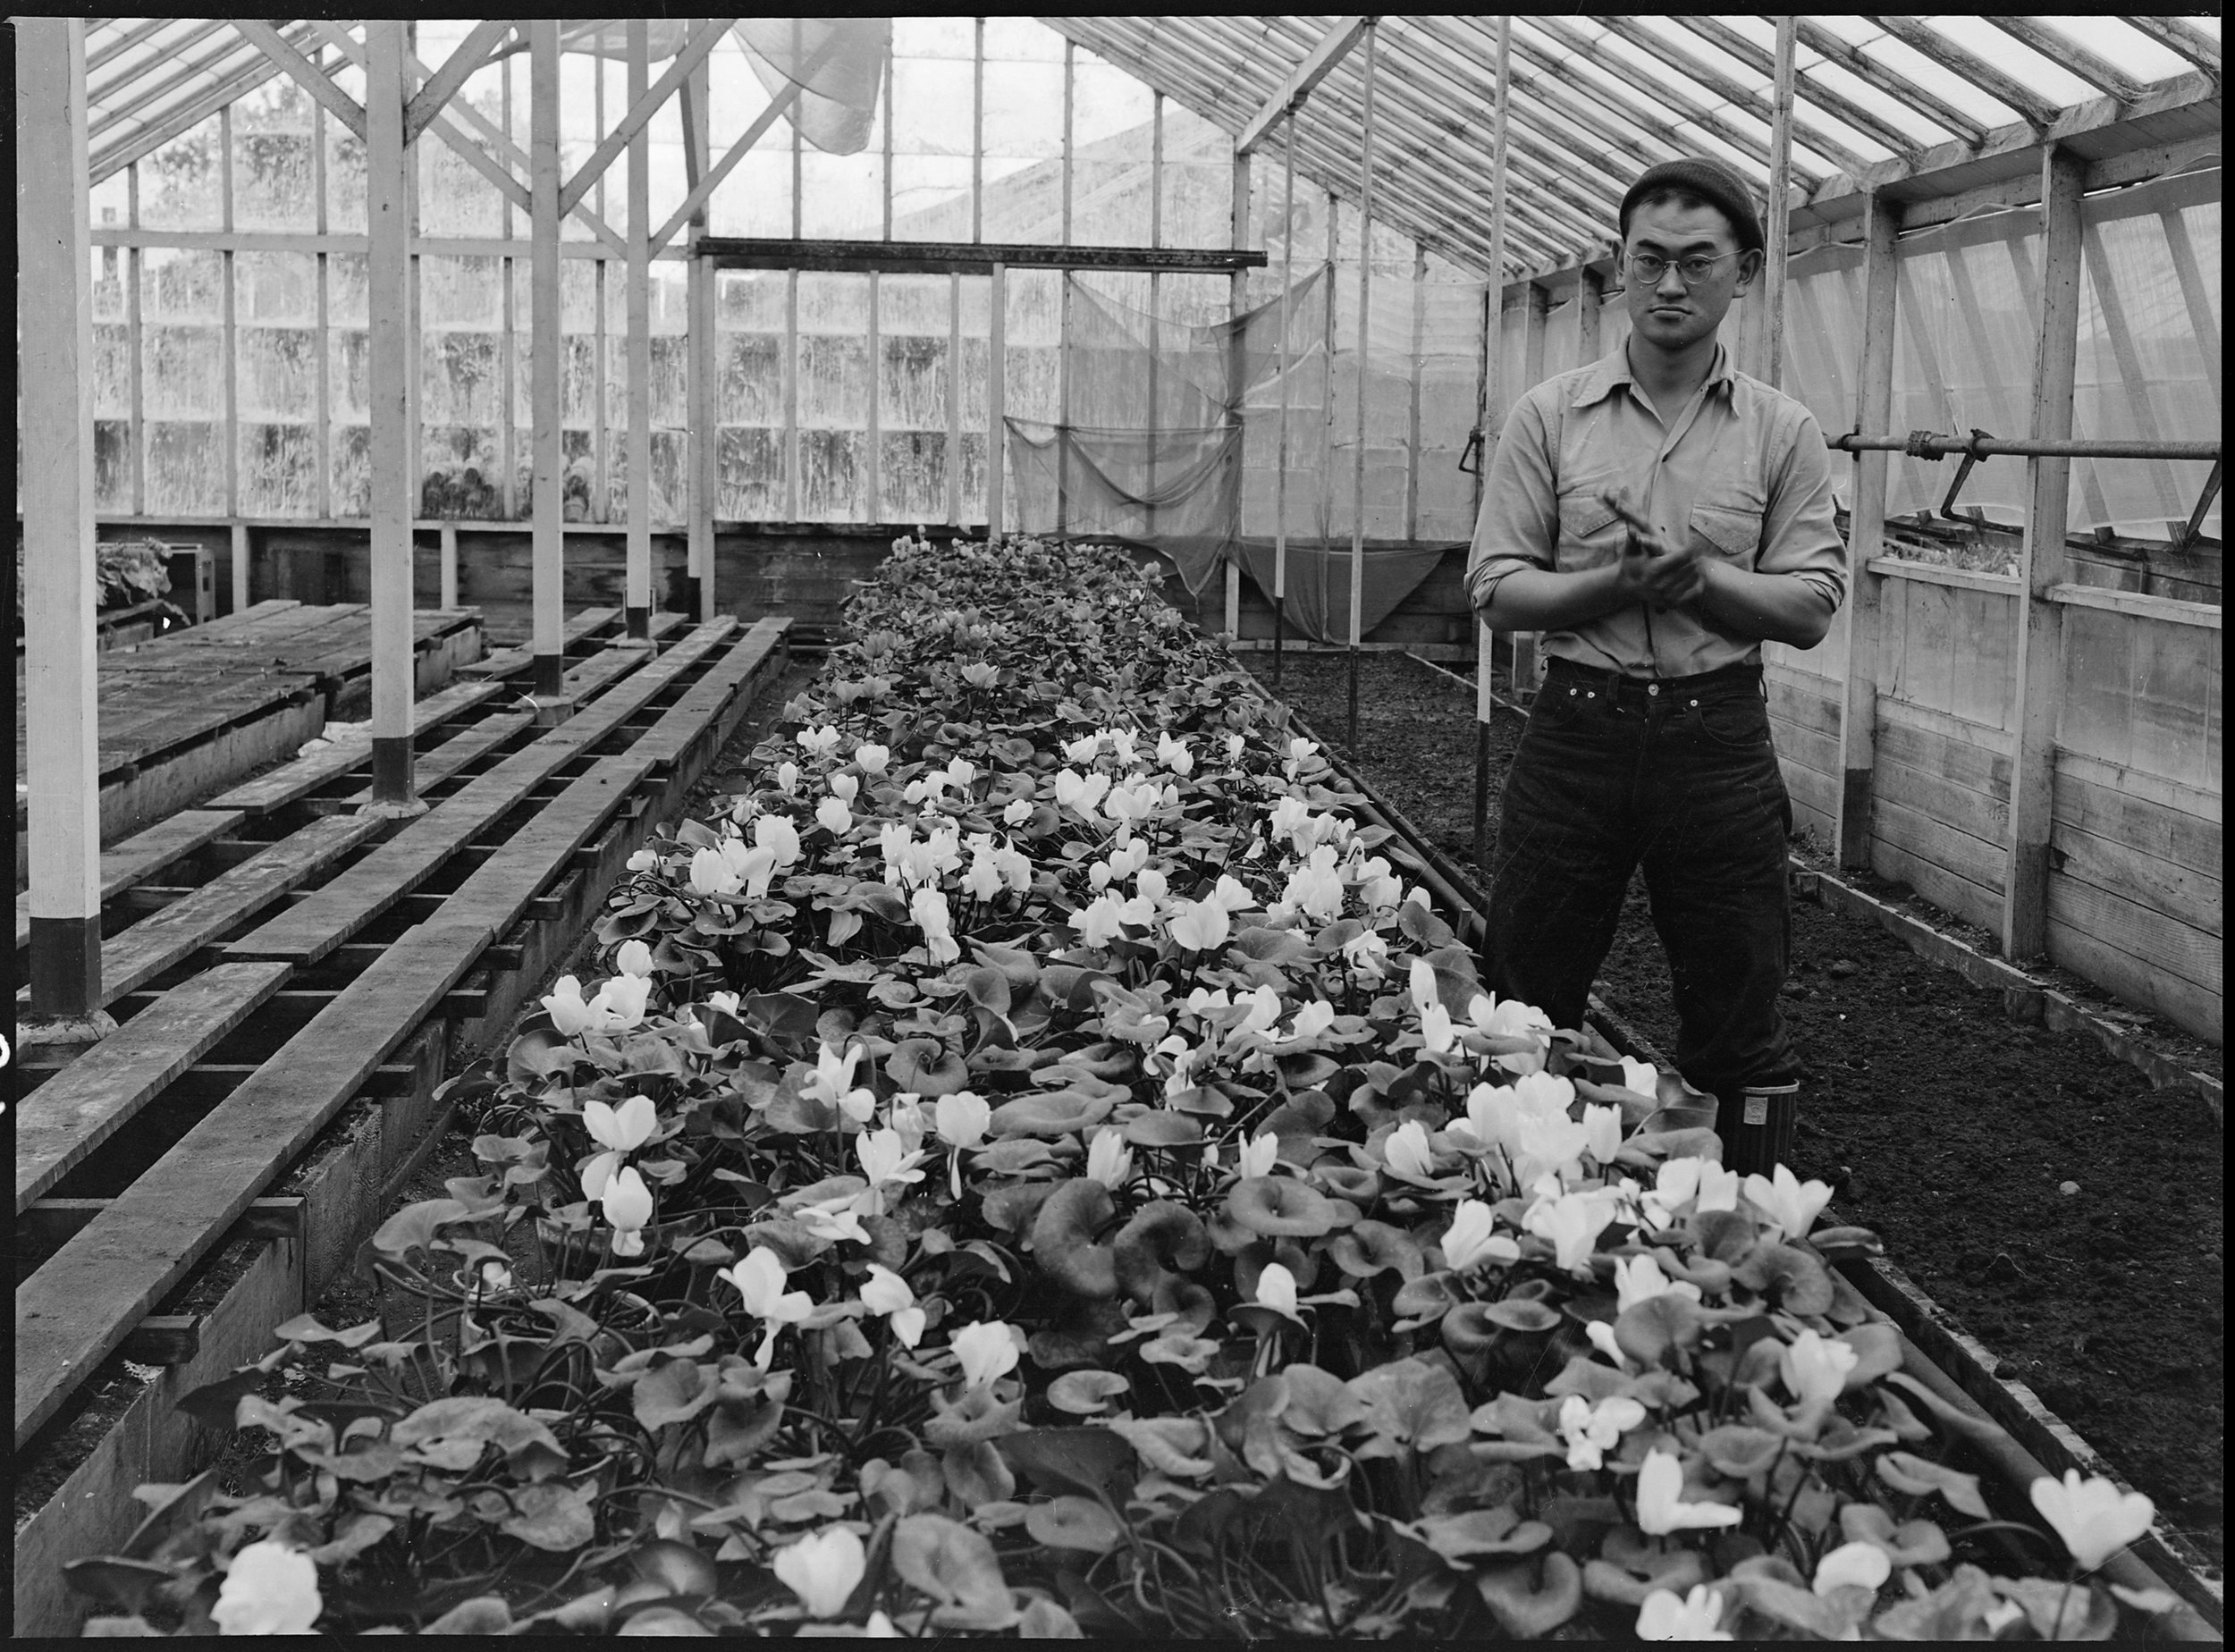    PRINT AVAILABLE   San Leandro, California. Greenhouse on nursery operated, before evacuation, by horticultural experts of Japanese ancestry. Many of the Nisei (born in this country) attended leading agricultural colleges such as that at Cornell. E